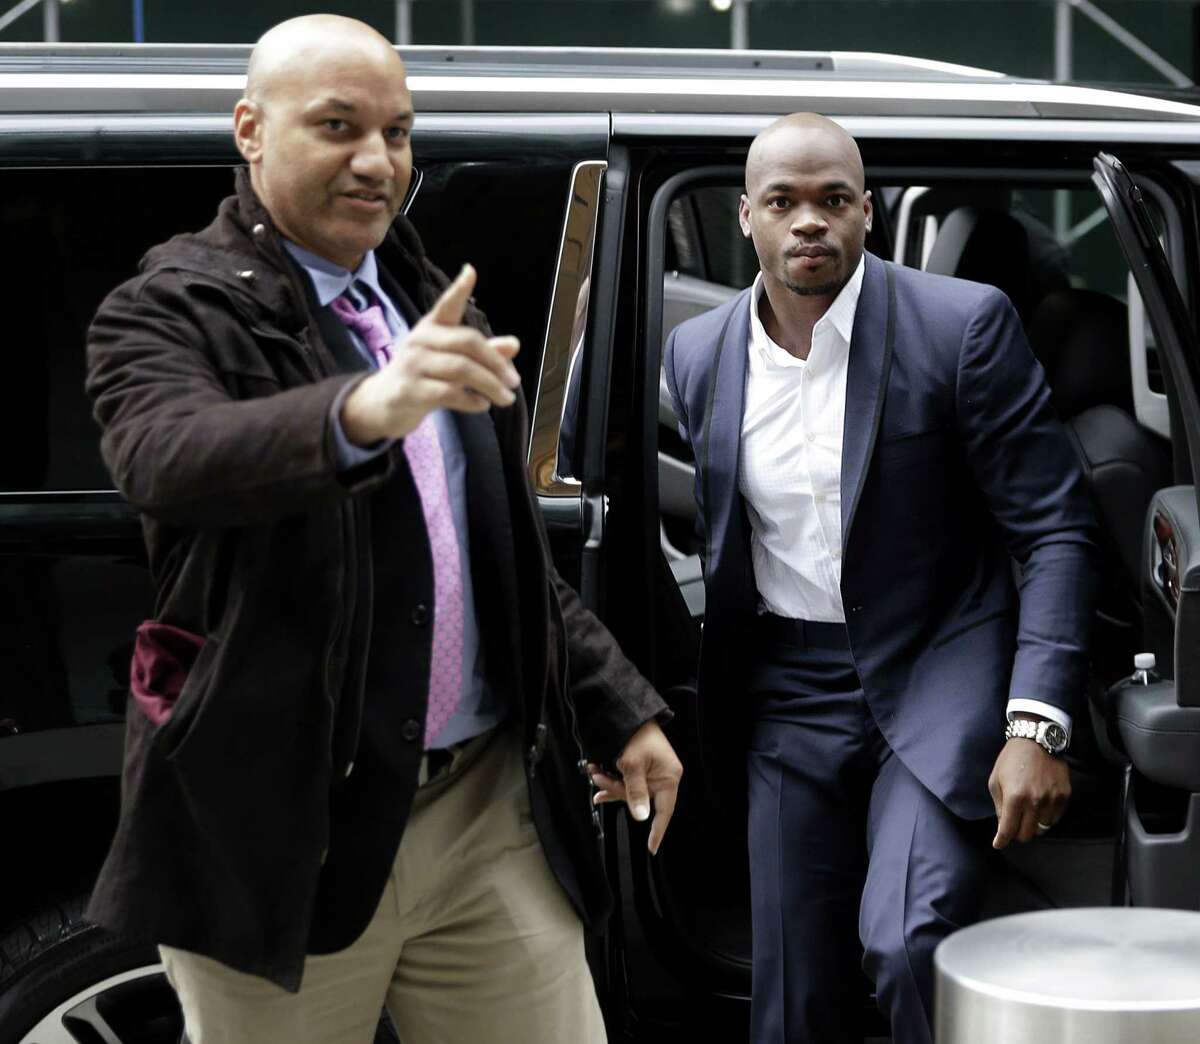 Adrian Peterson, right, arrives for a hearing for the appeal of his suspension in New York on Tuesday.